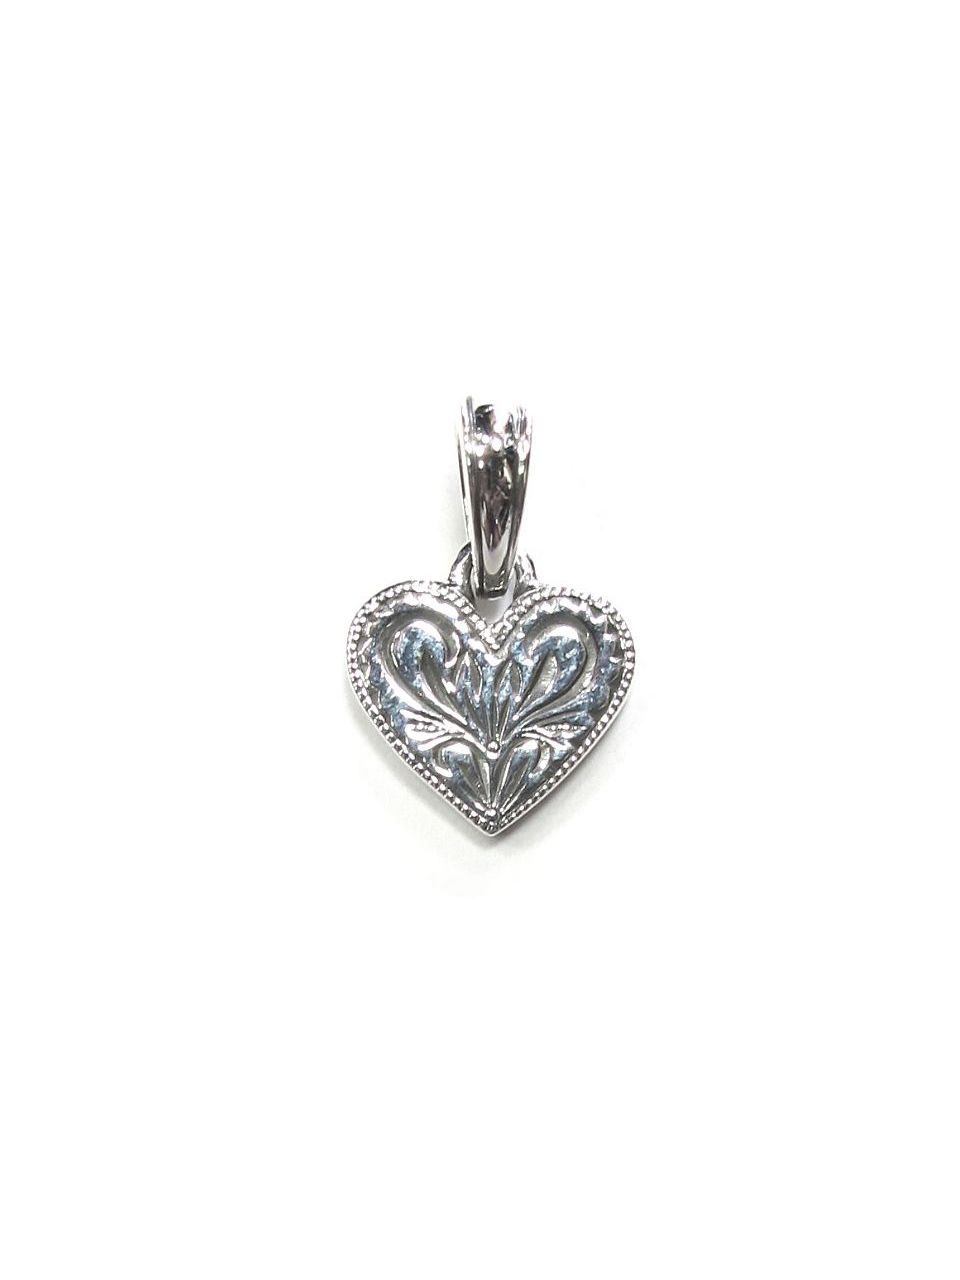 ANTIDOTE BUYERS CLUB - ENGRAVED HEART PENDANT (SILVER 